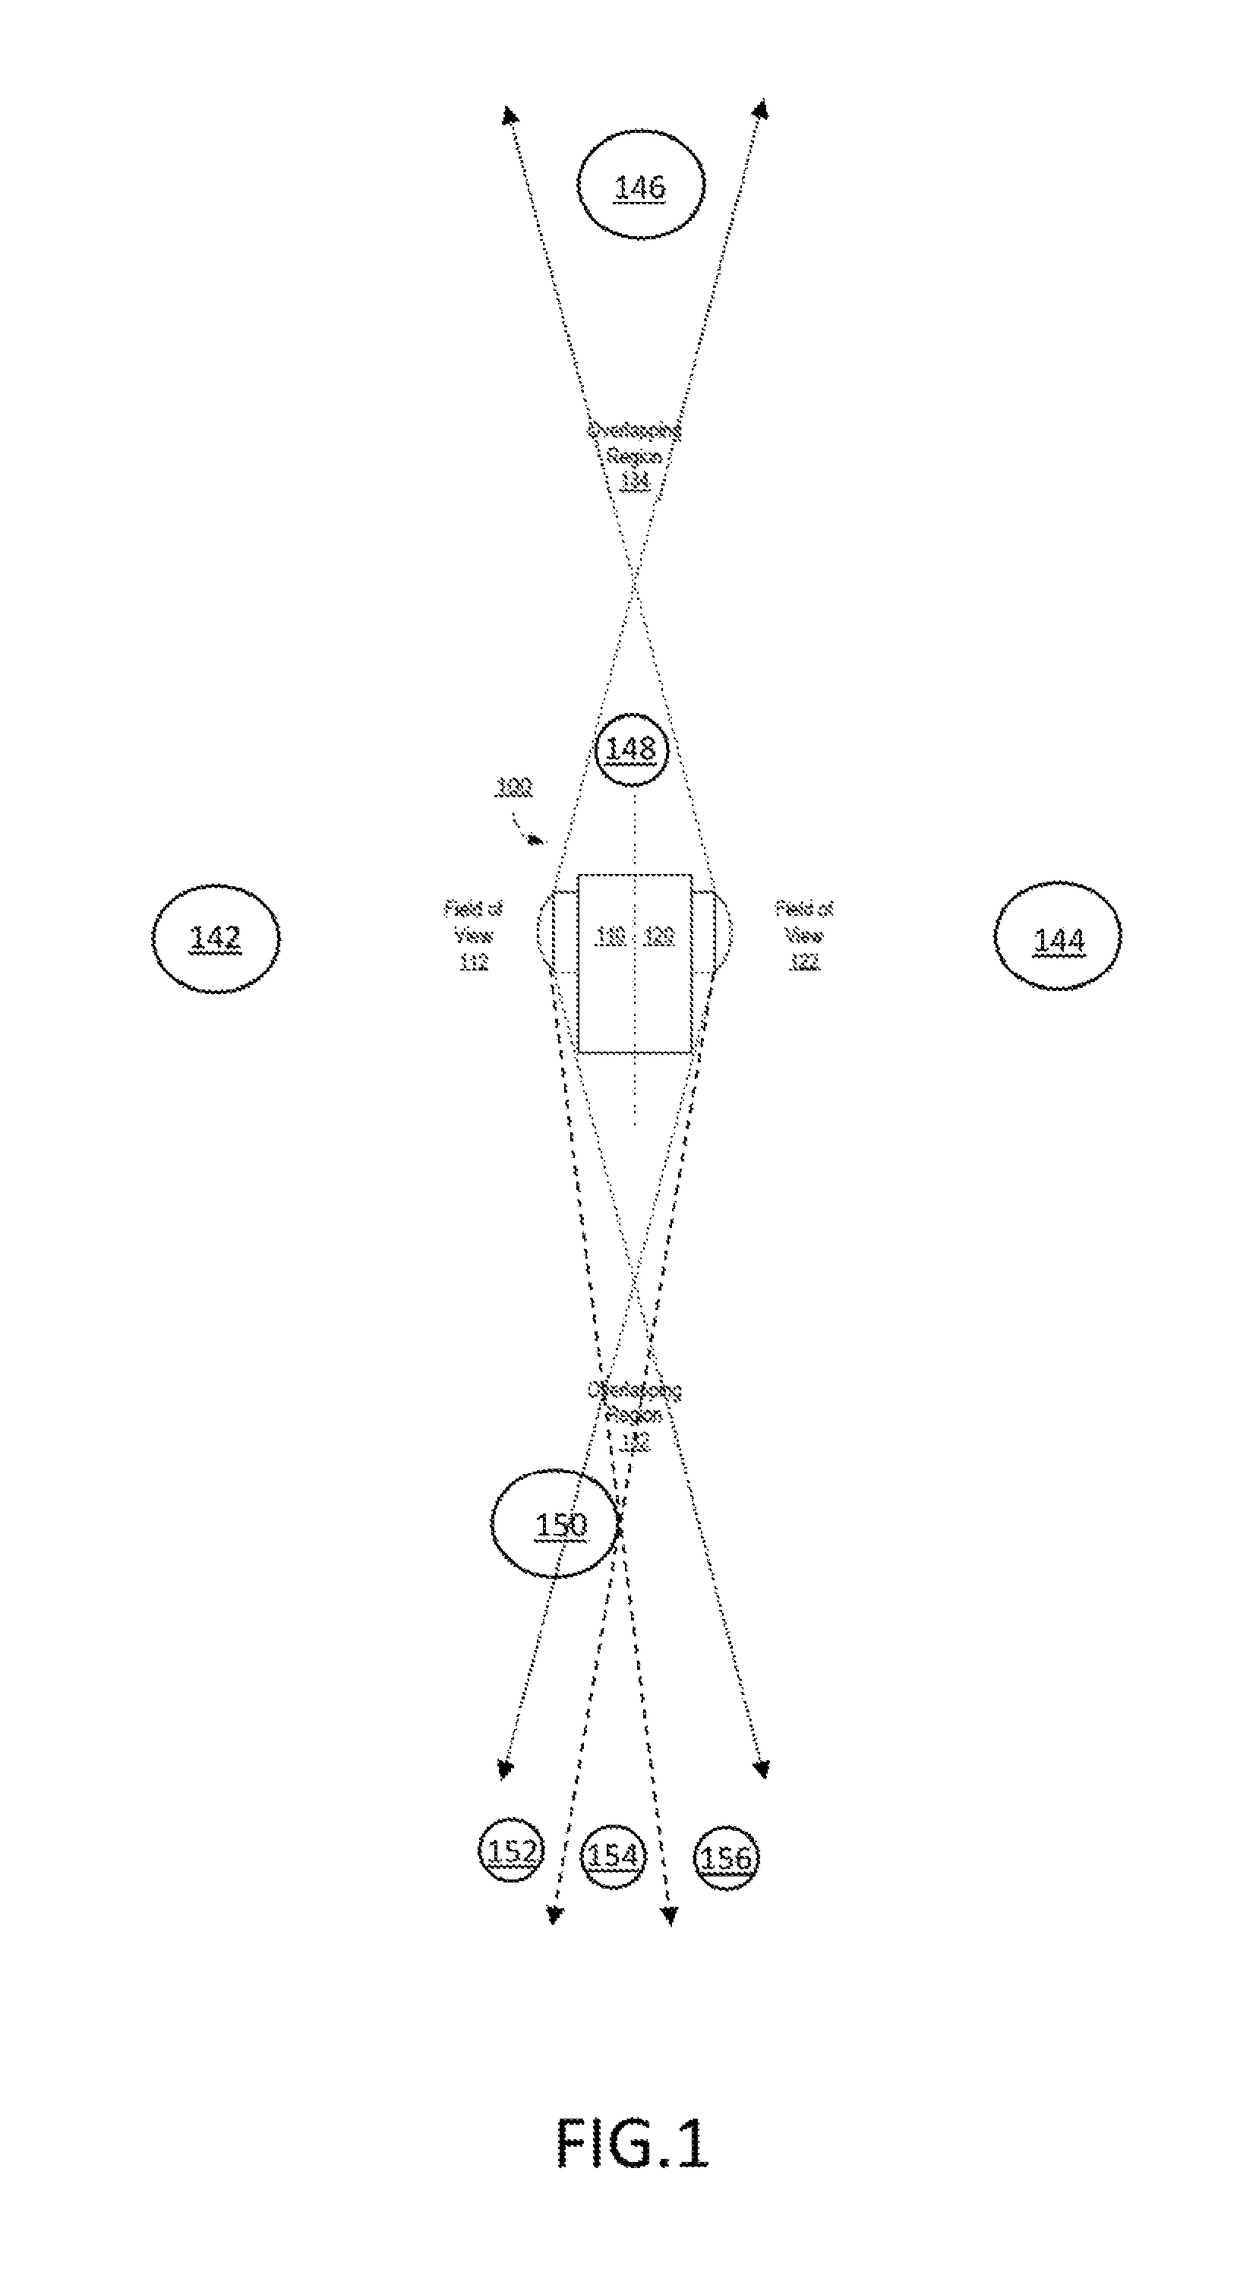 Apparatus and methods for the storage of overlapping regions of imaging data for the generation of optimized stitched images